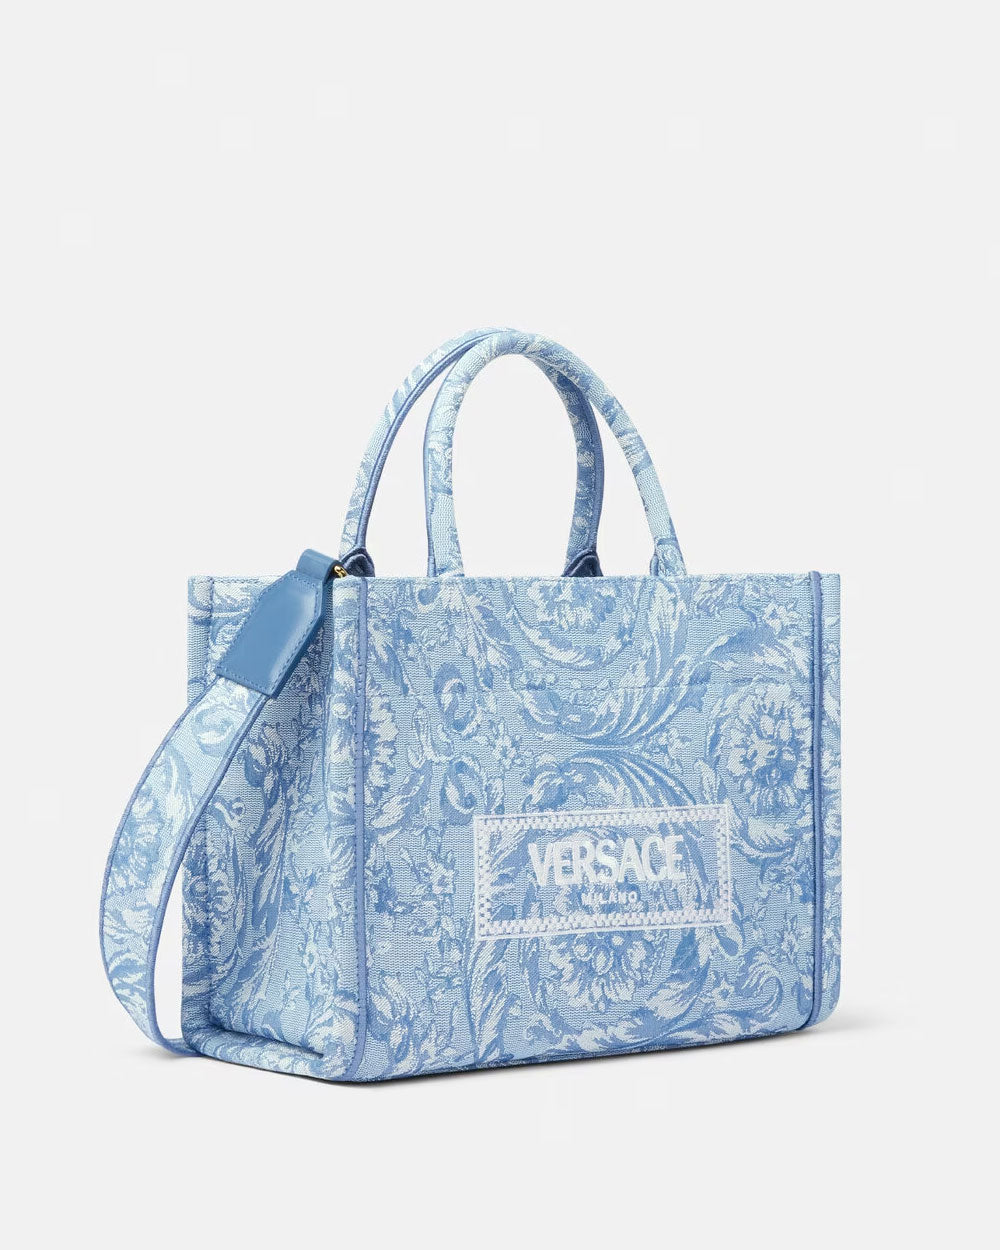 Barocco Athena Small Tote Bag in Baby Blue